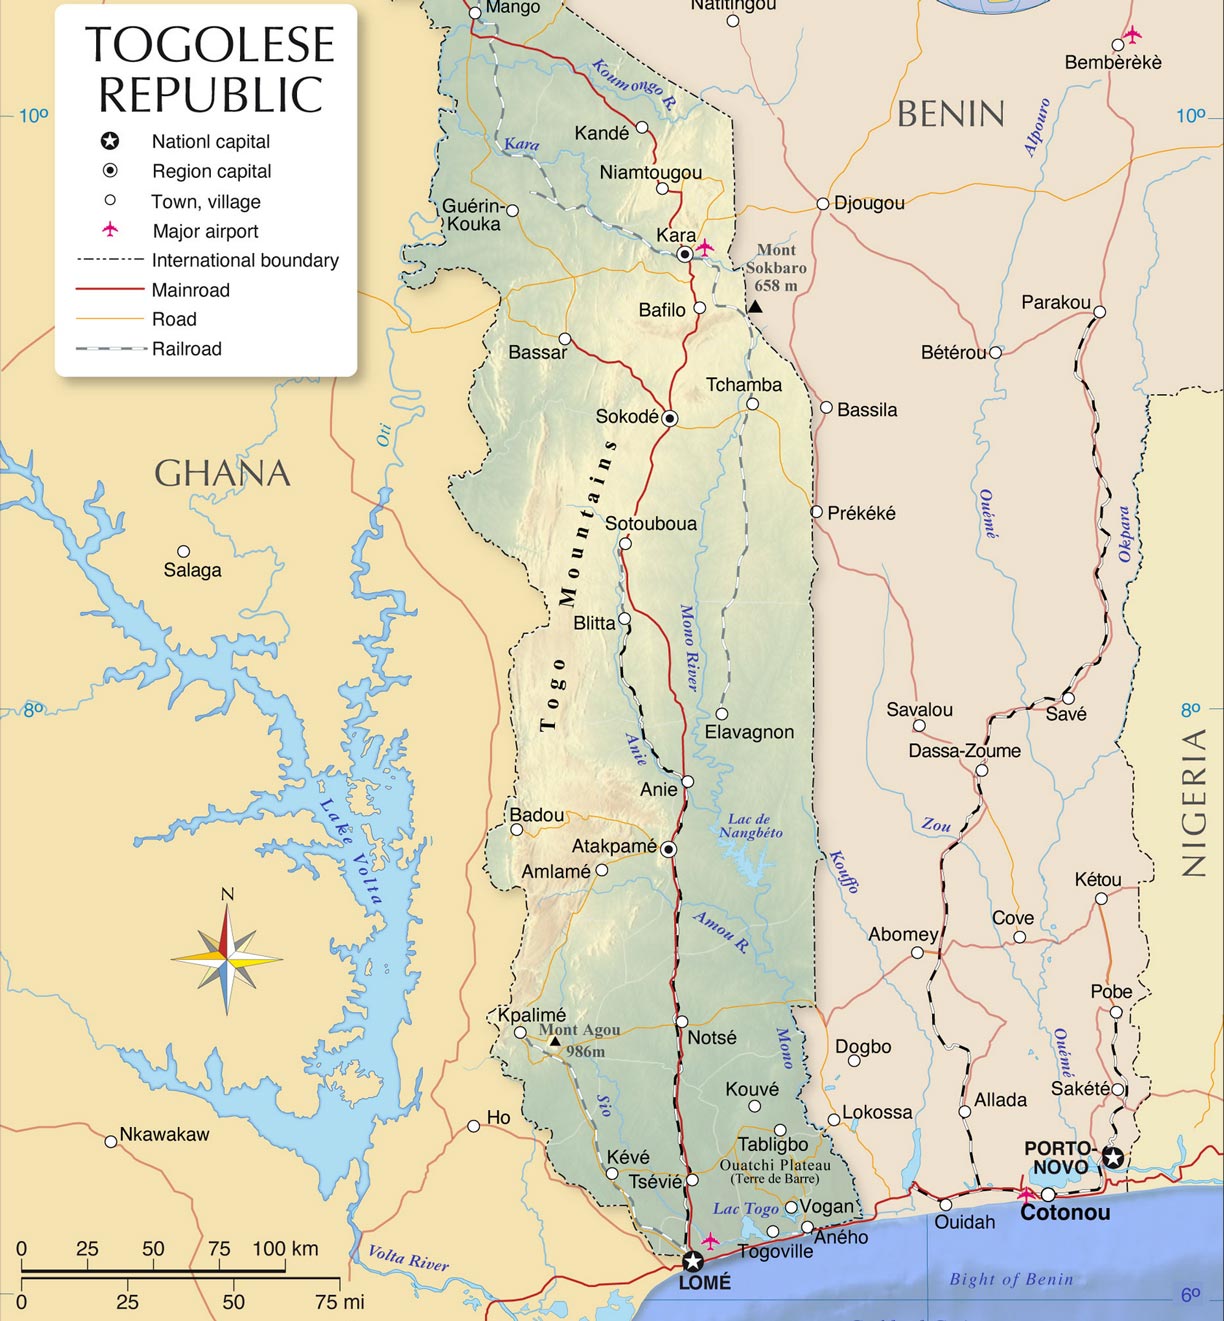 Political map of Togo and surrounding countries with cities, main roads, railroads and airports